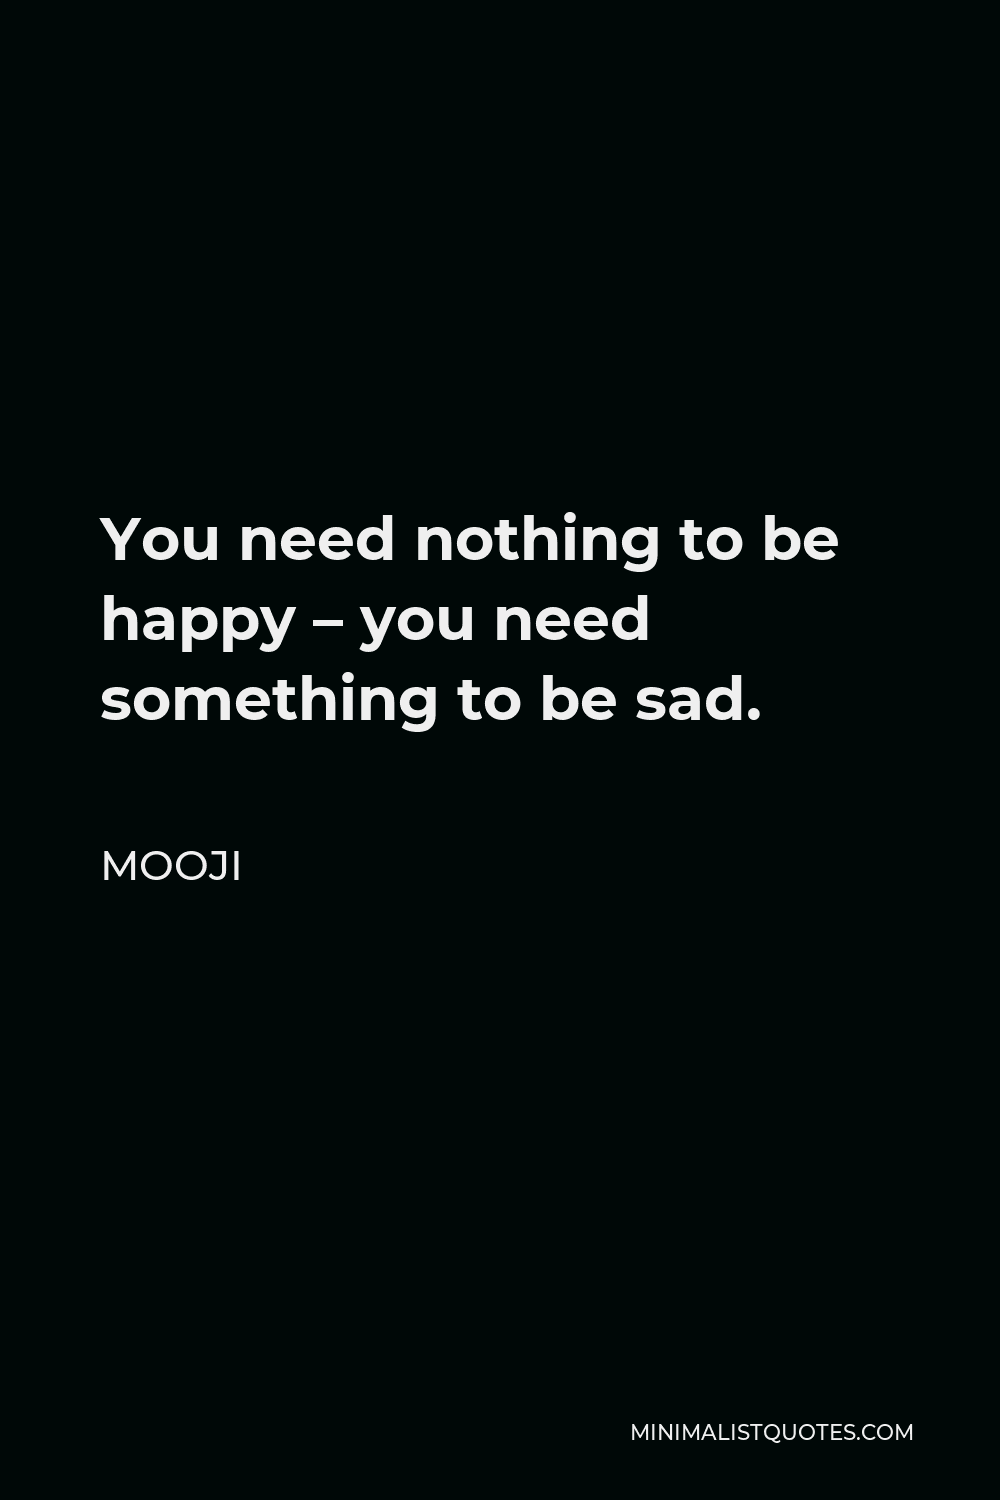 Mooji Quote: You need nothing to be happy - you need something to be sad.